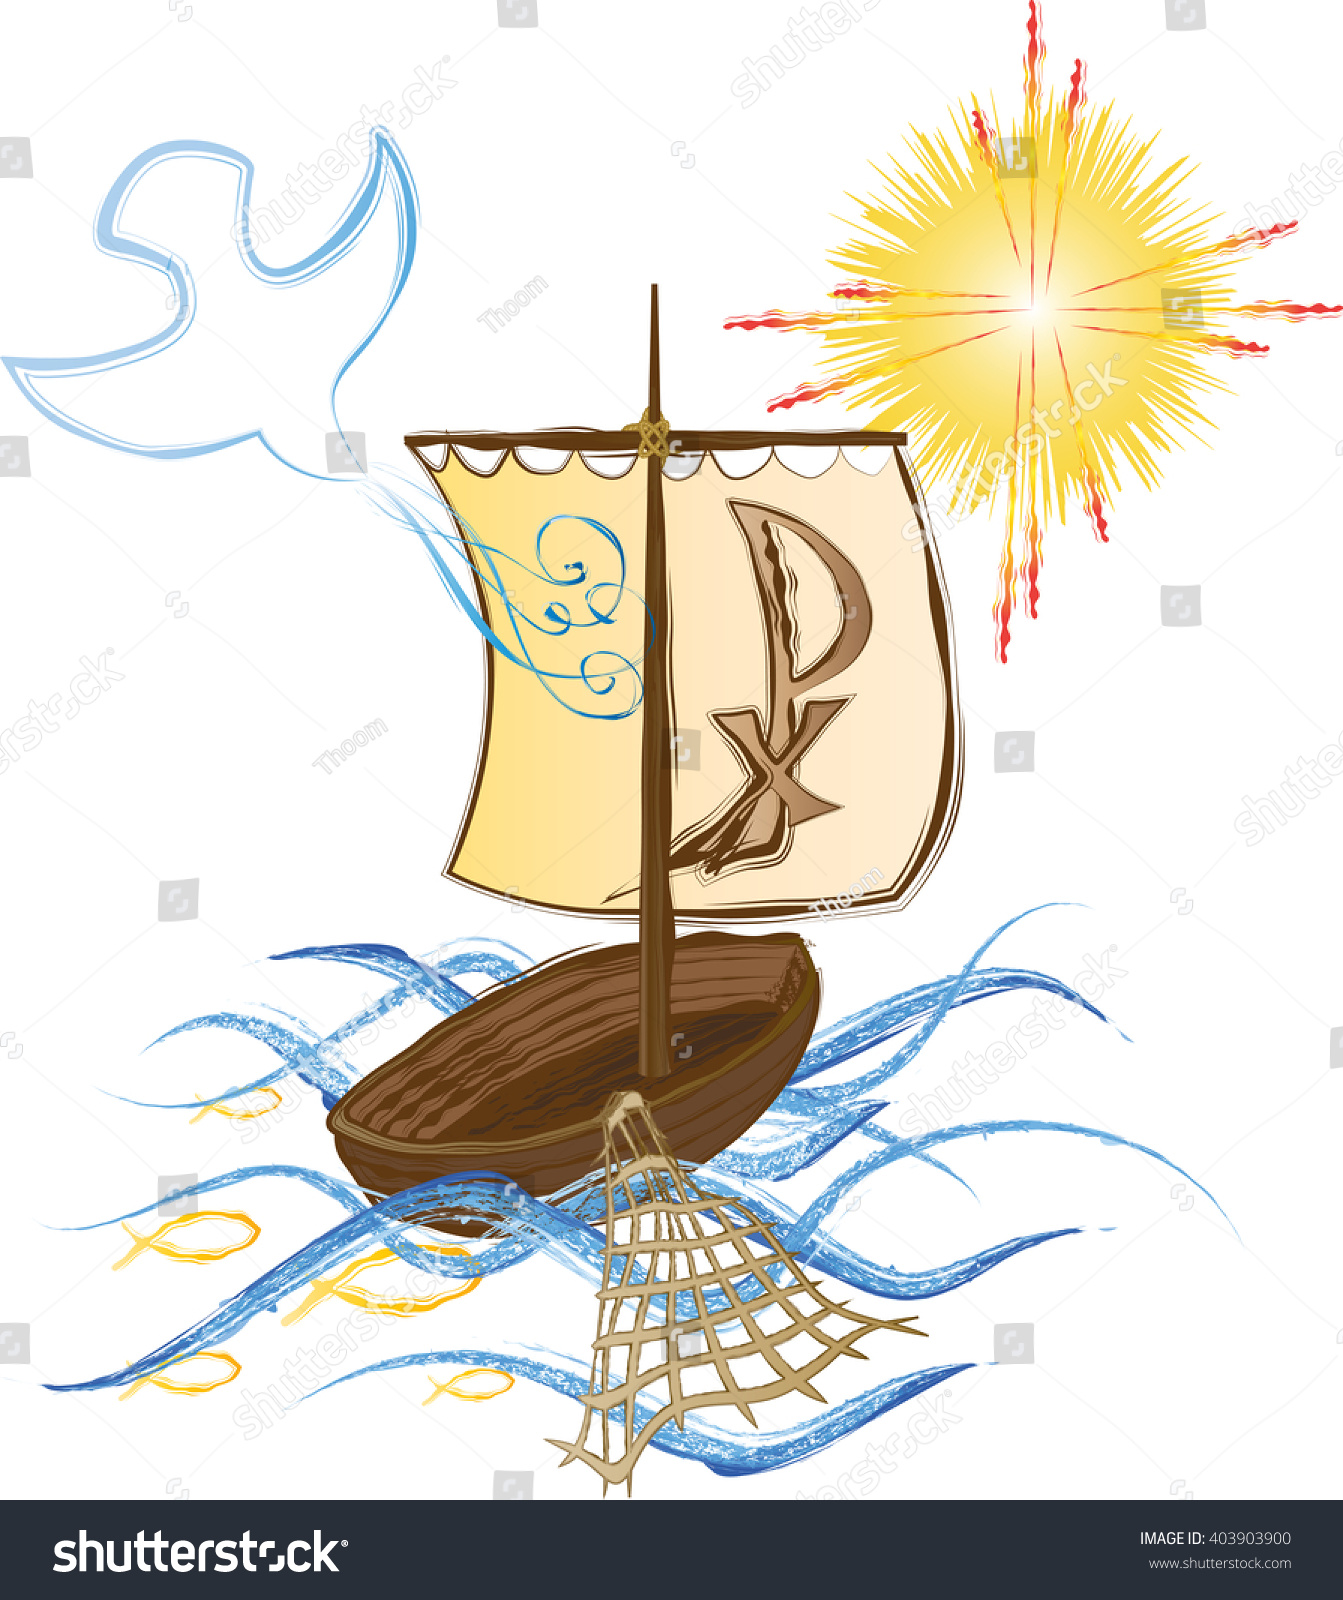 jesus in a boat clipart - photo #28